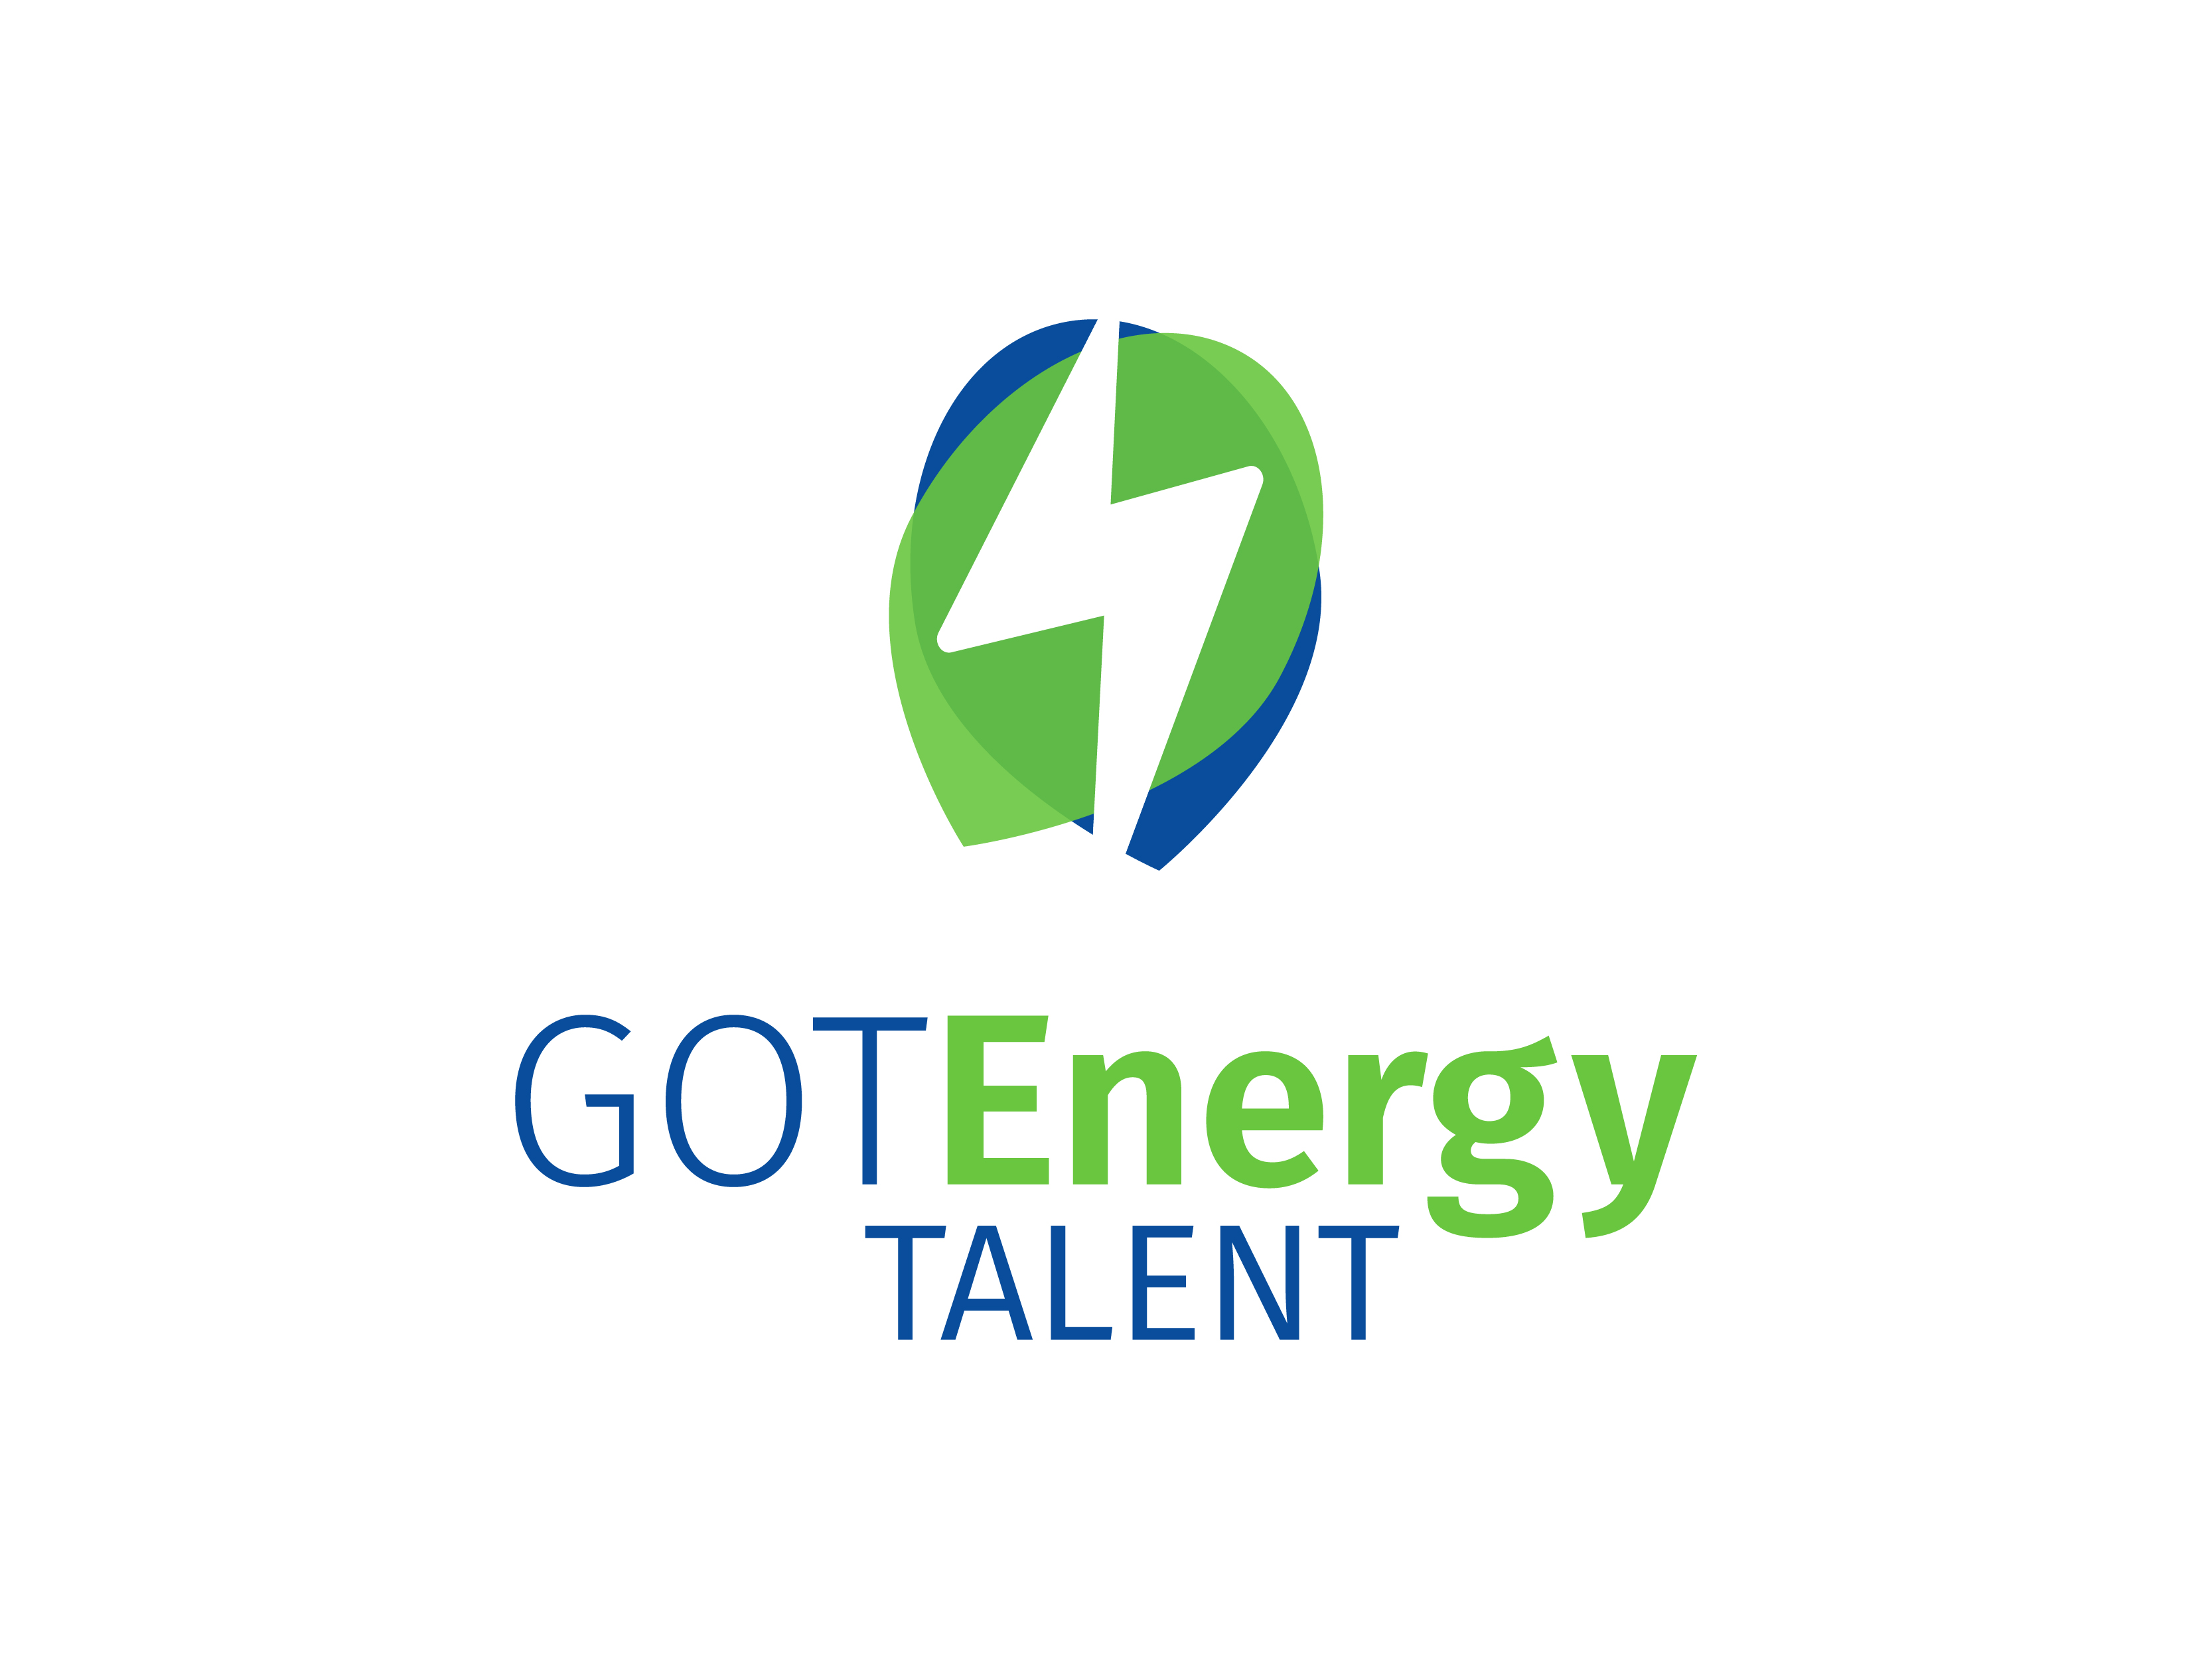 Final results of Got Energy Talent MSCA-COFUND 1st call for fellowship